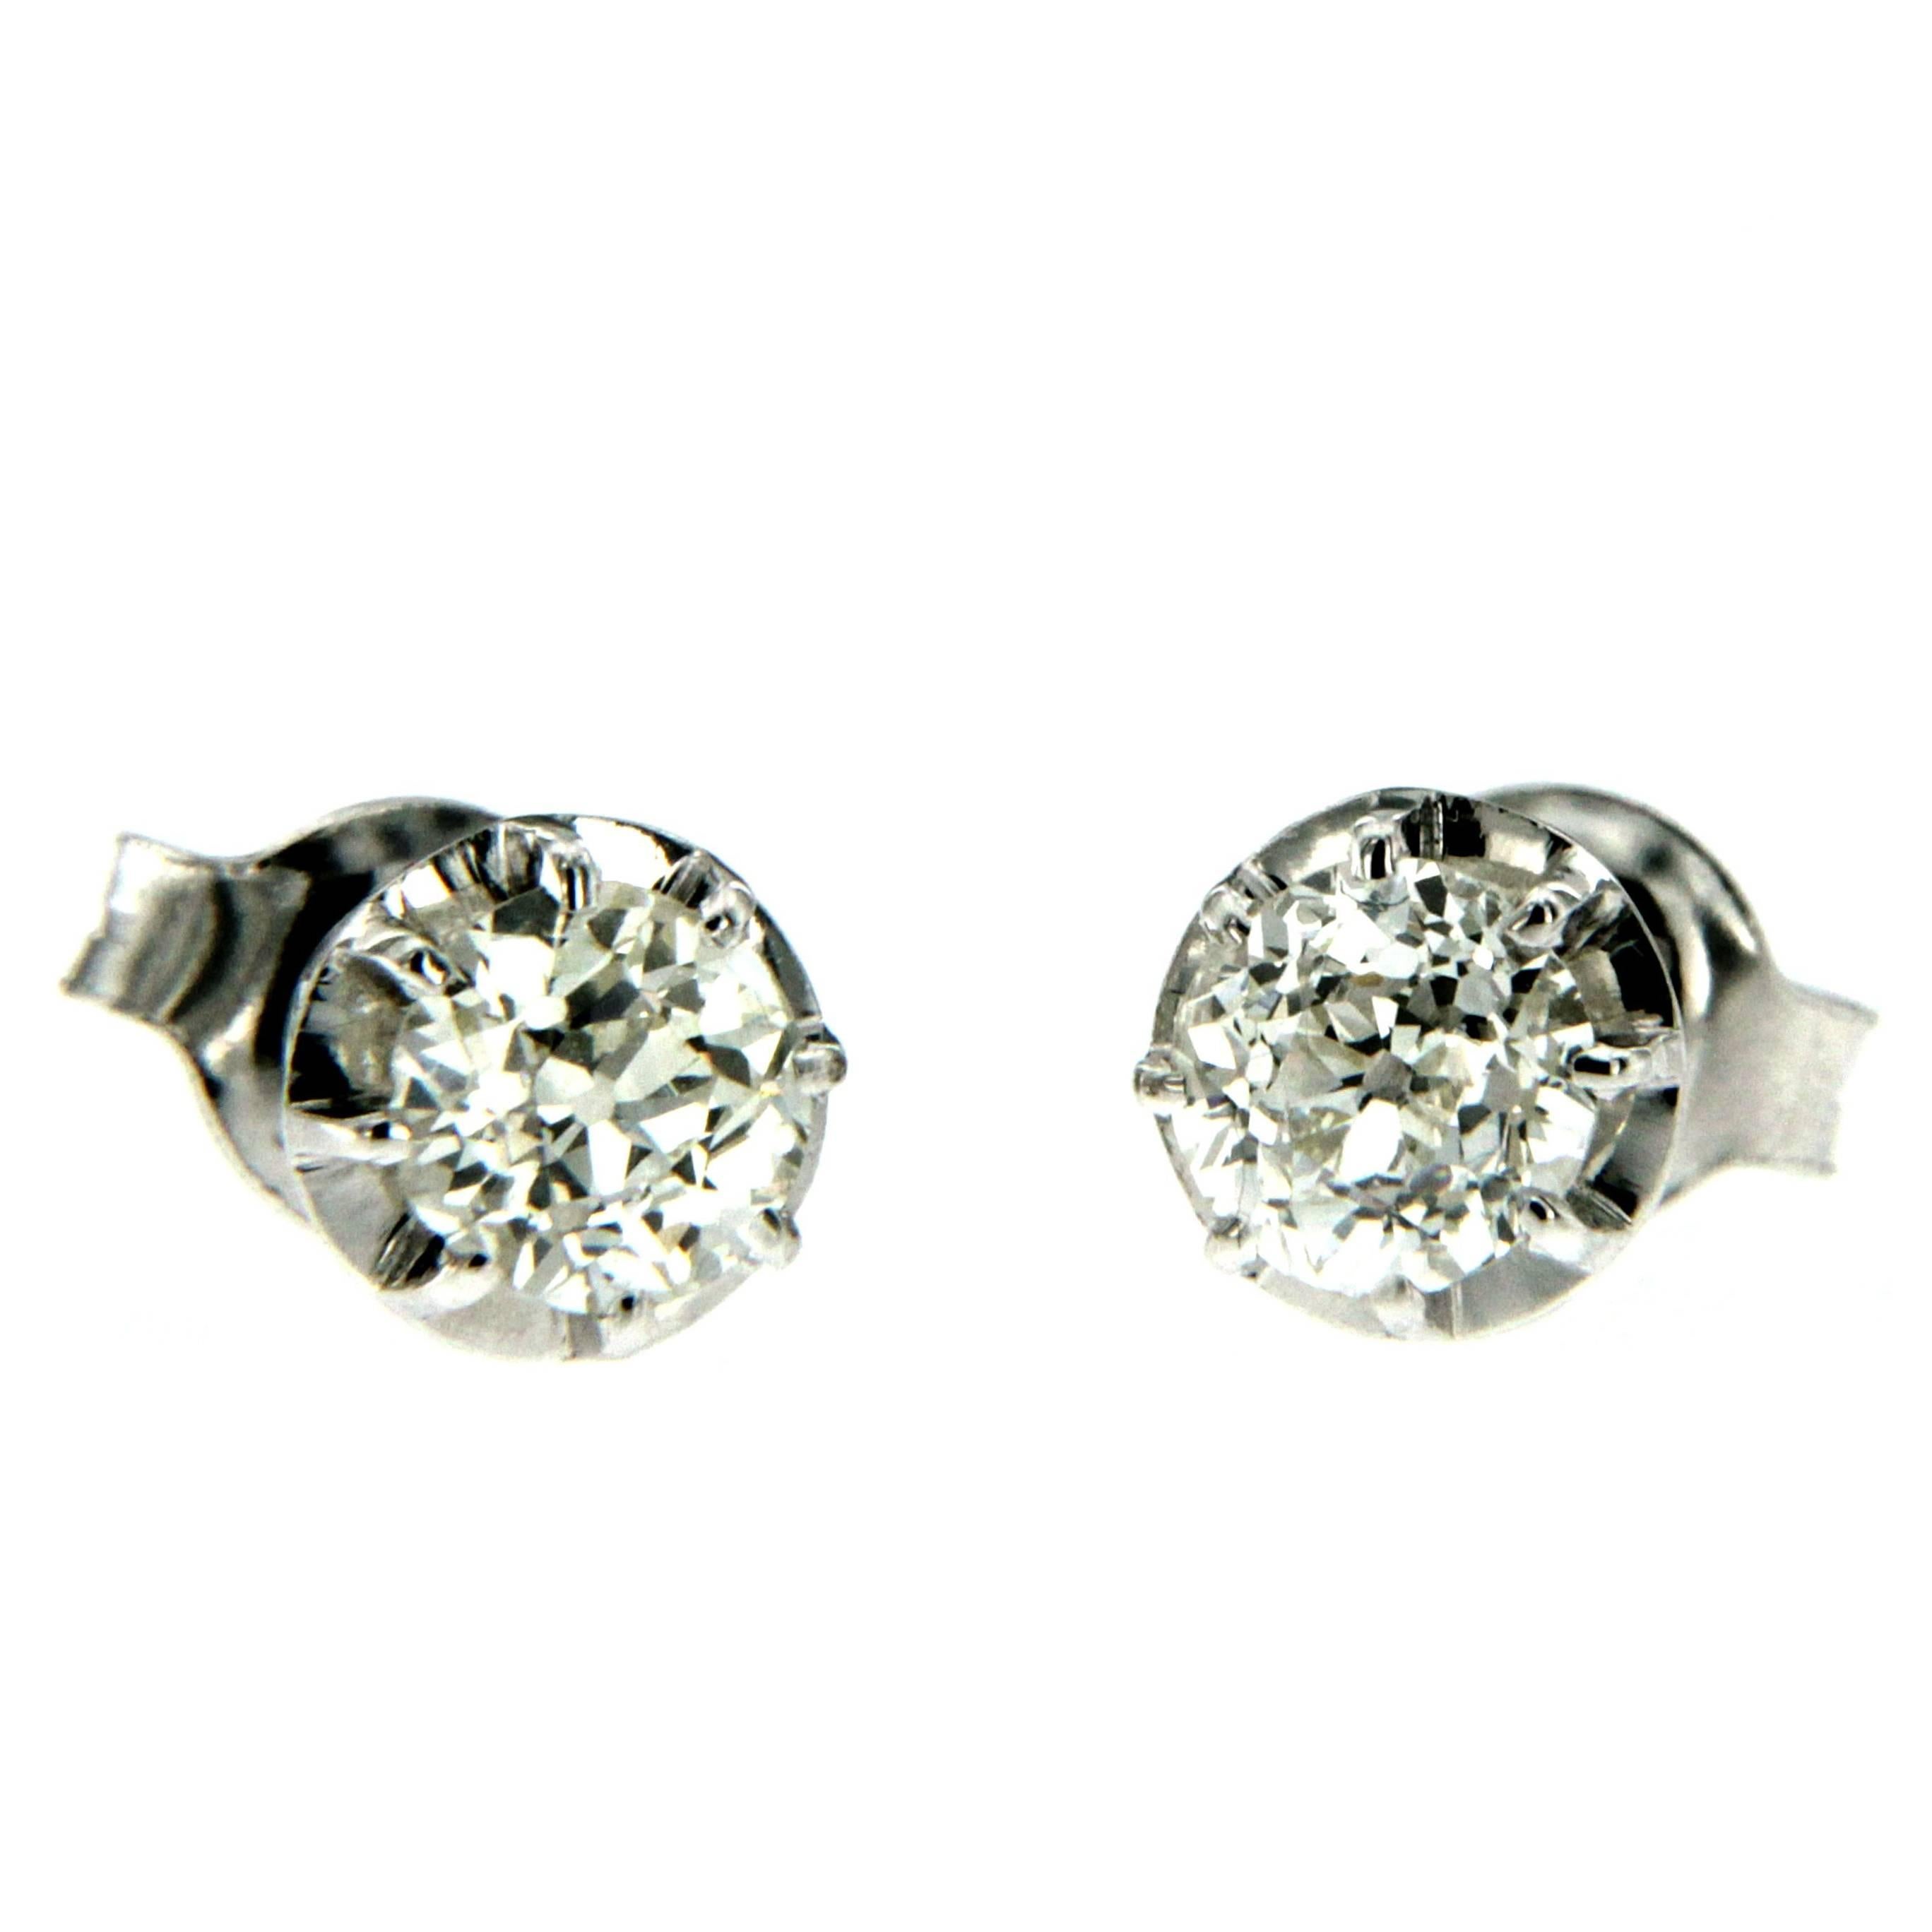 Old cut Diamonds Gold Solitaire Stud Earrings